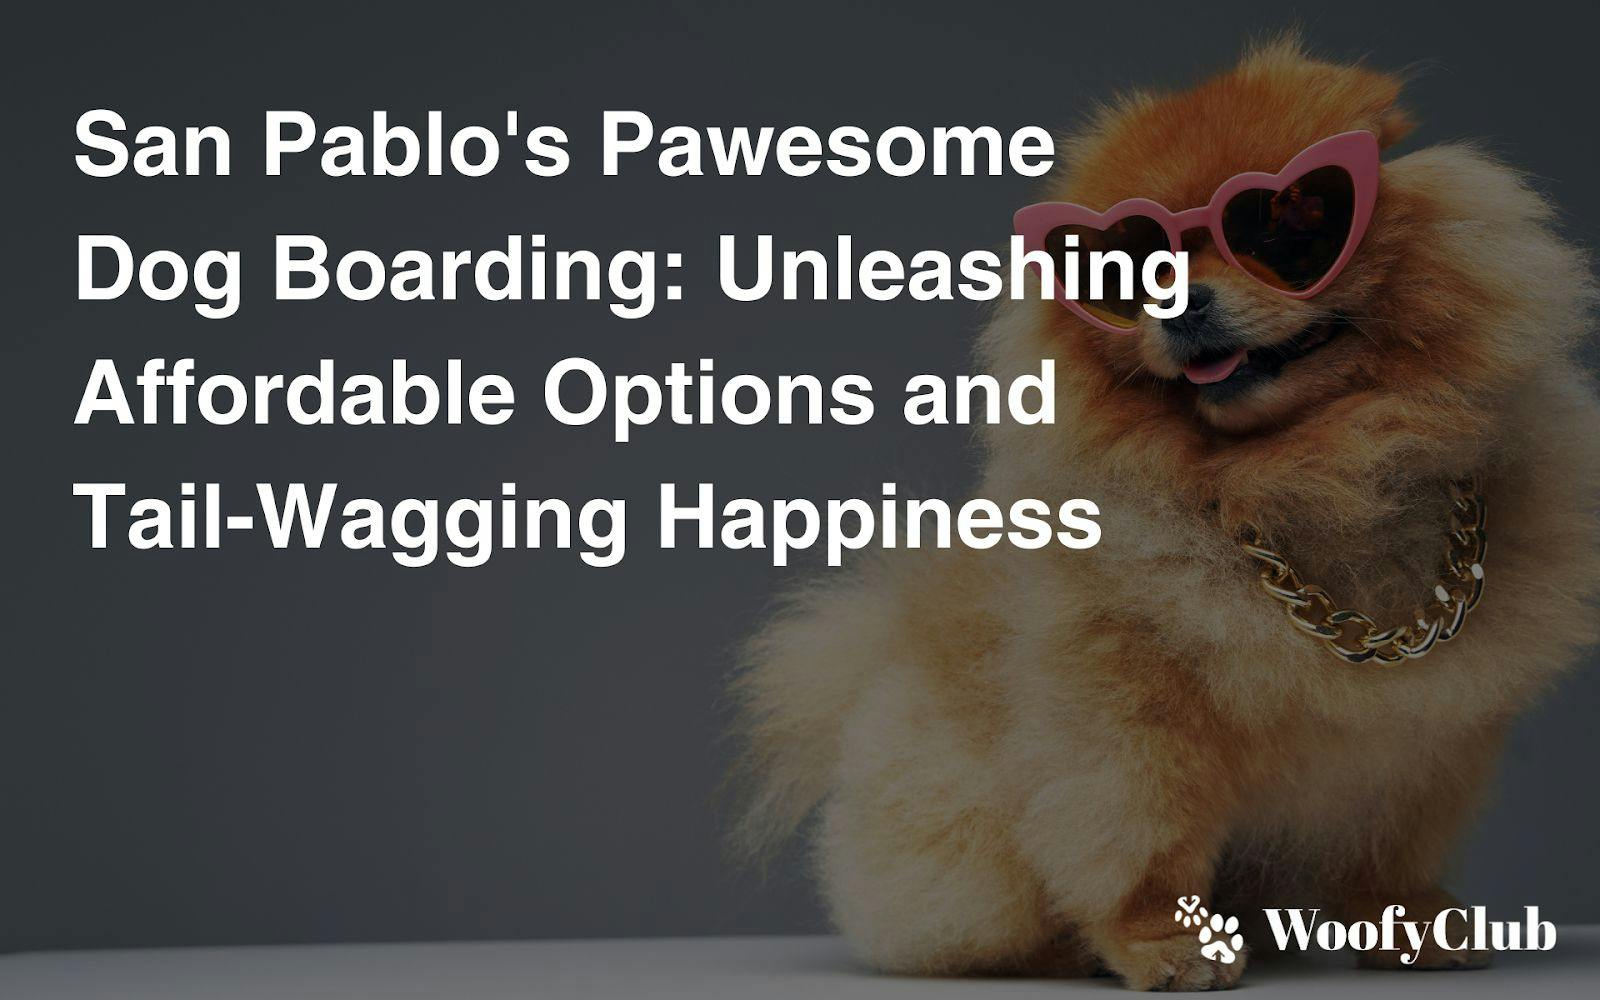 San Pablo's Pawesome Dog Boarding: Unleashing Affordable Options And Tail-Wagging Happiness